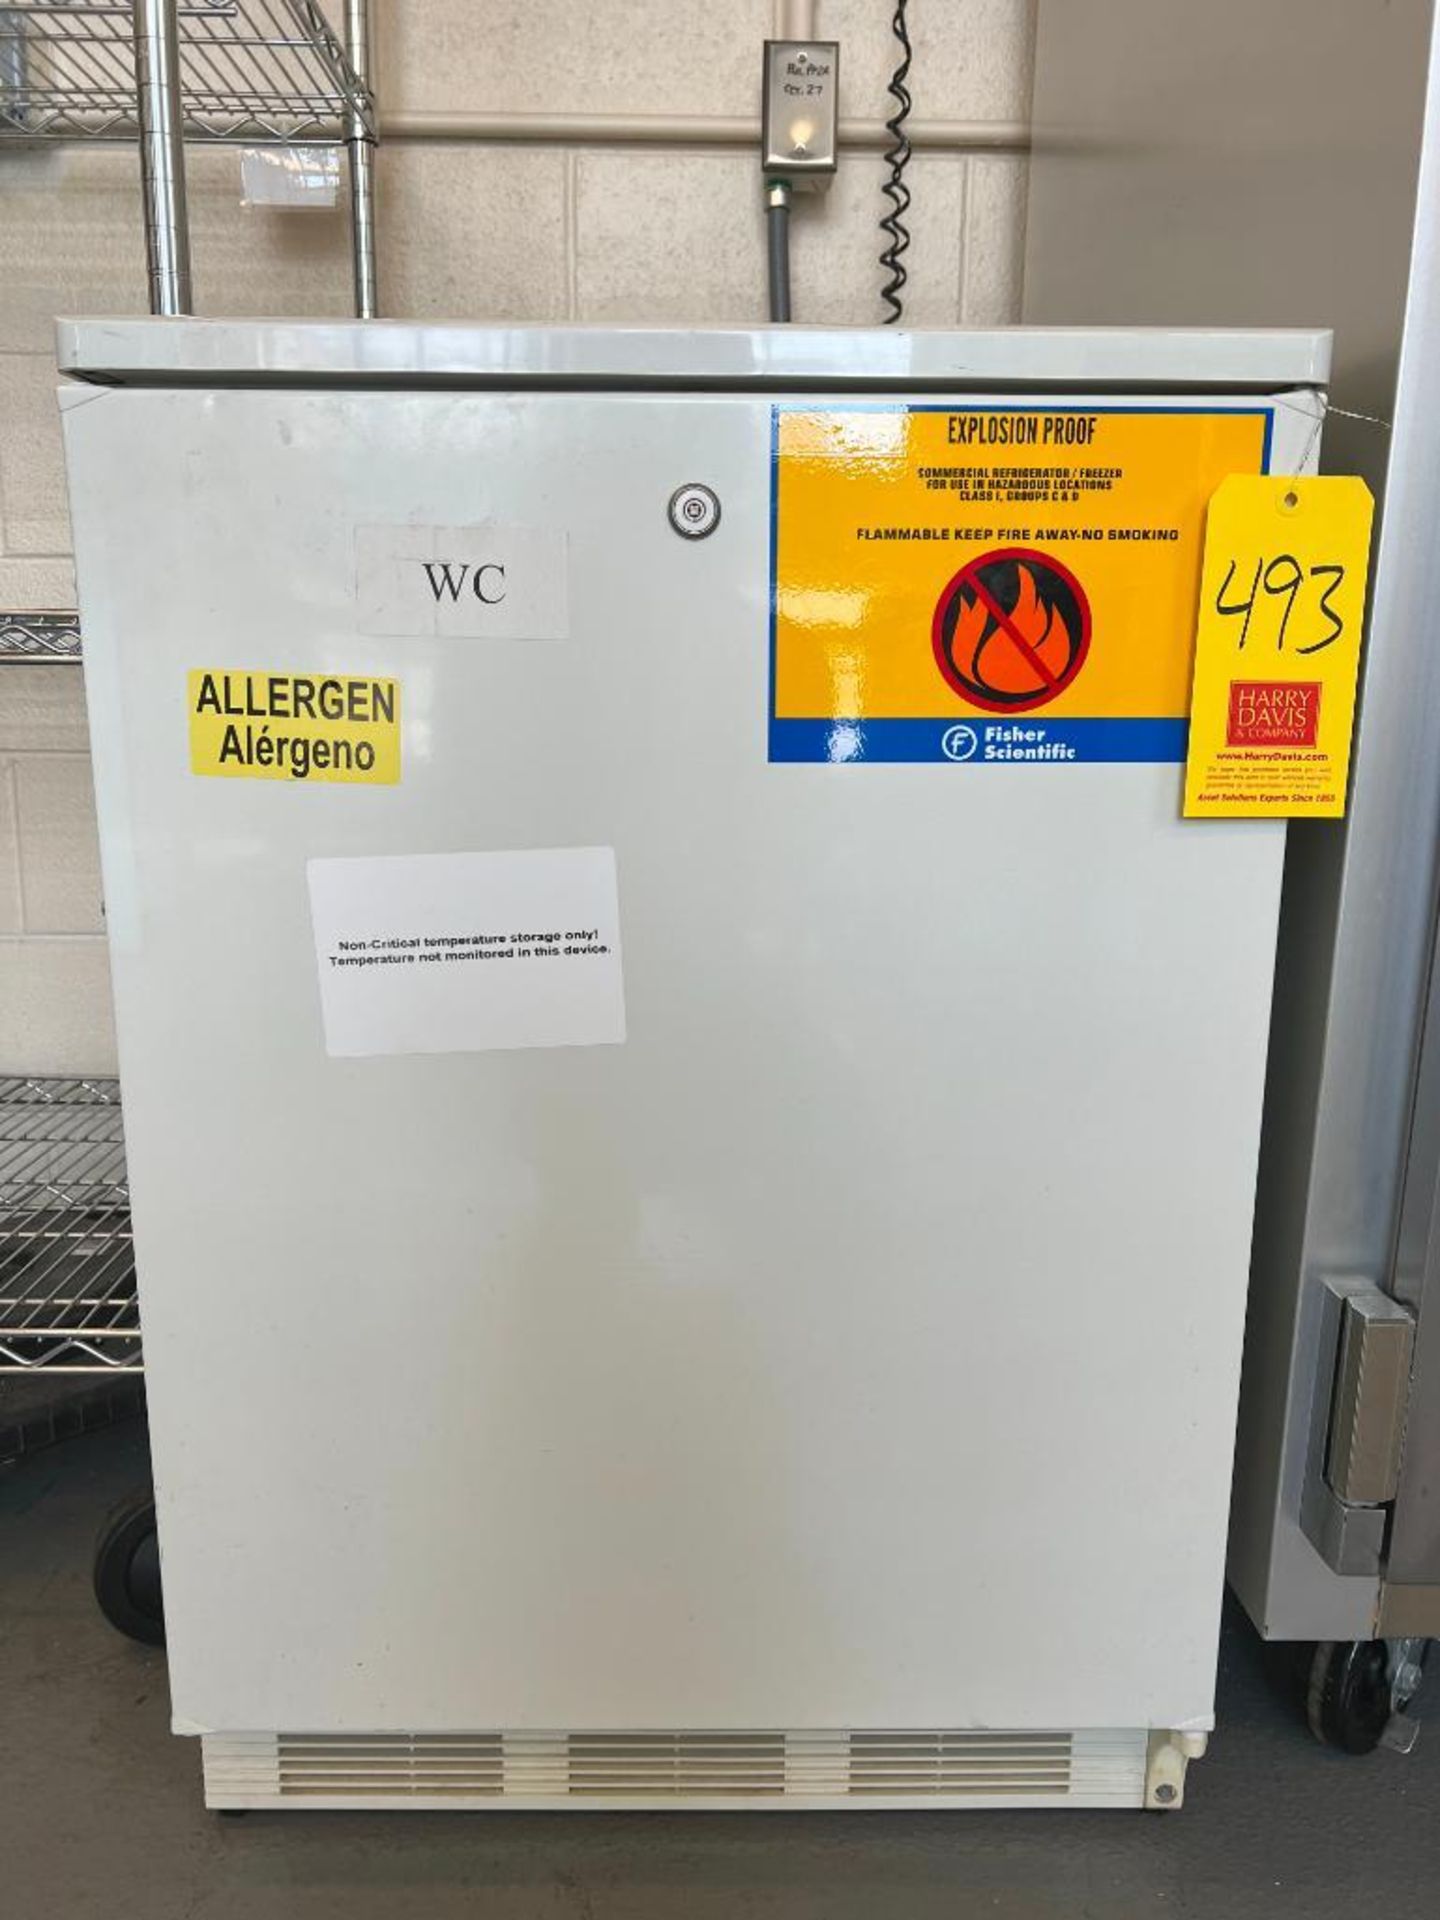 Fisher Scientific Explosion Proof Commercial Refrigerator/Freezer - Rigging Fee: $200